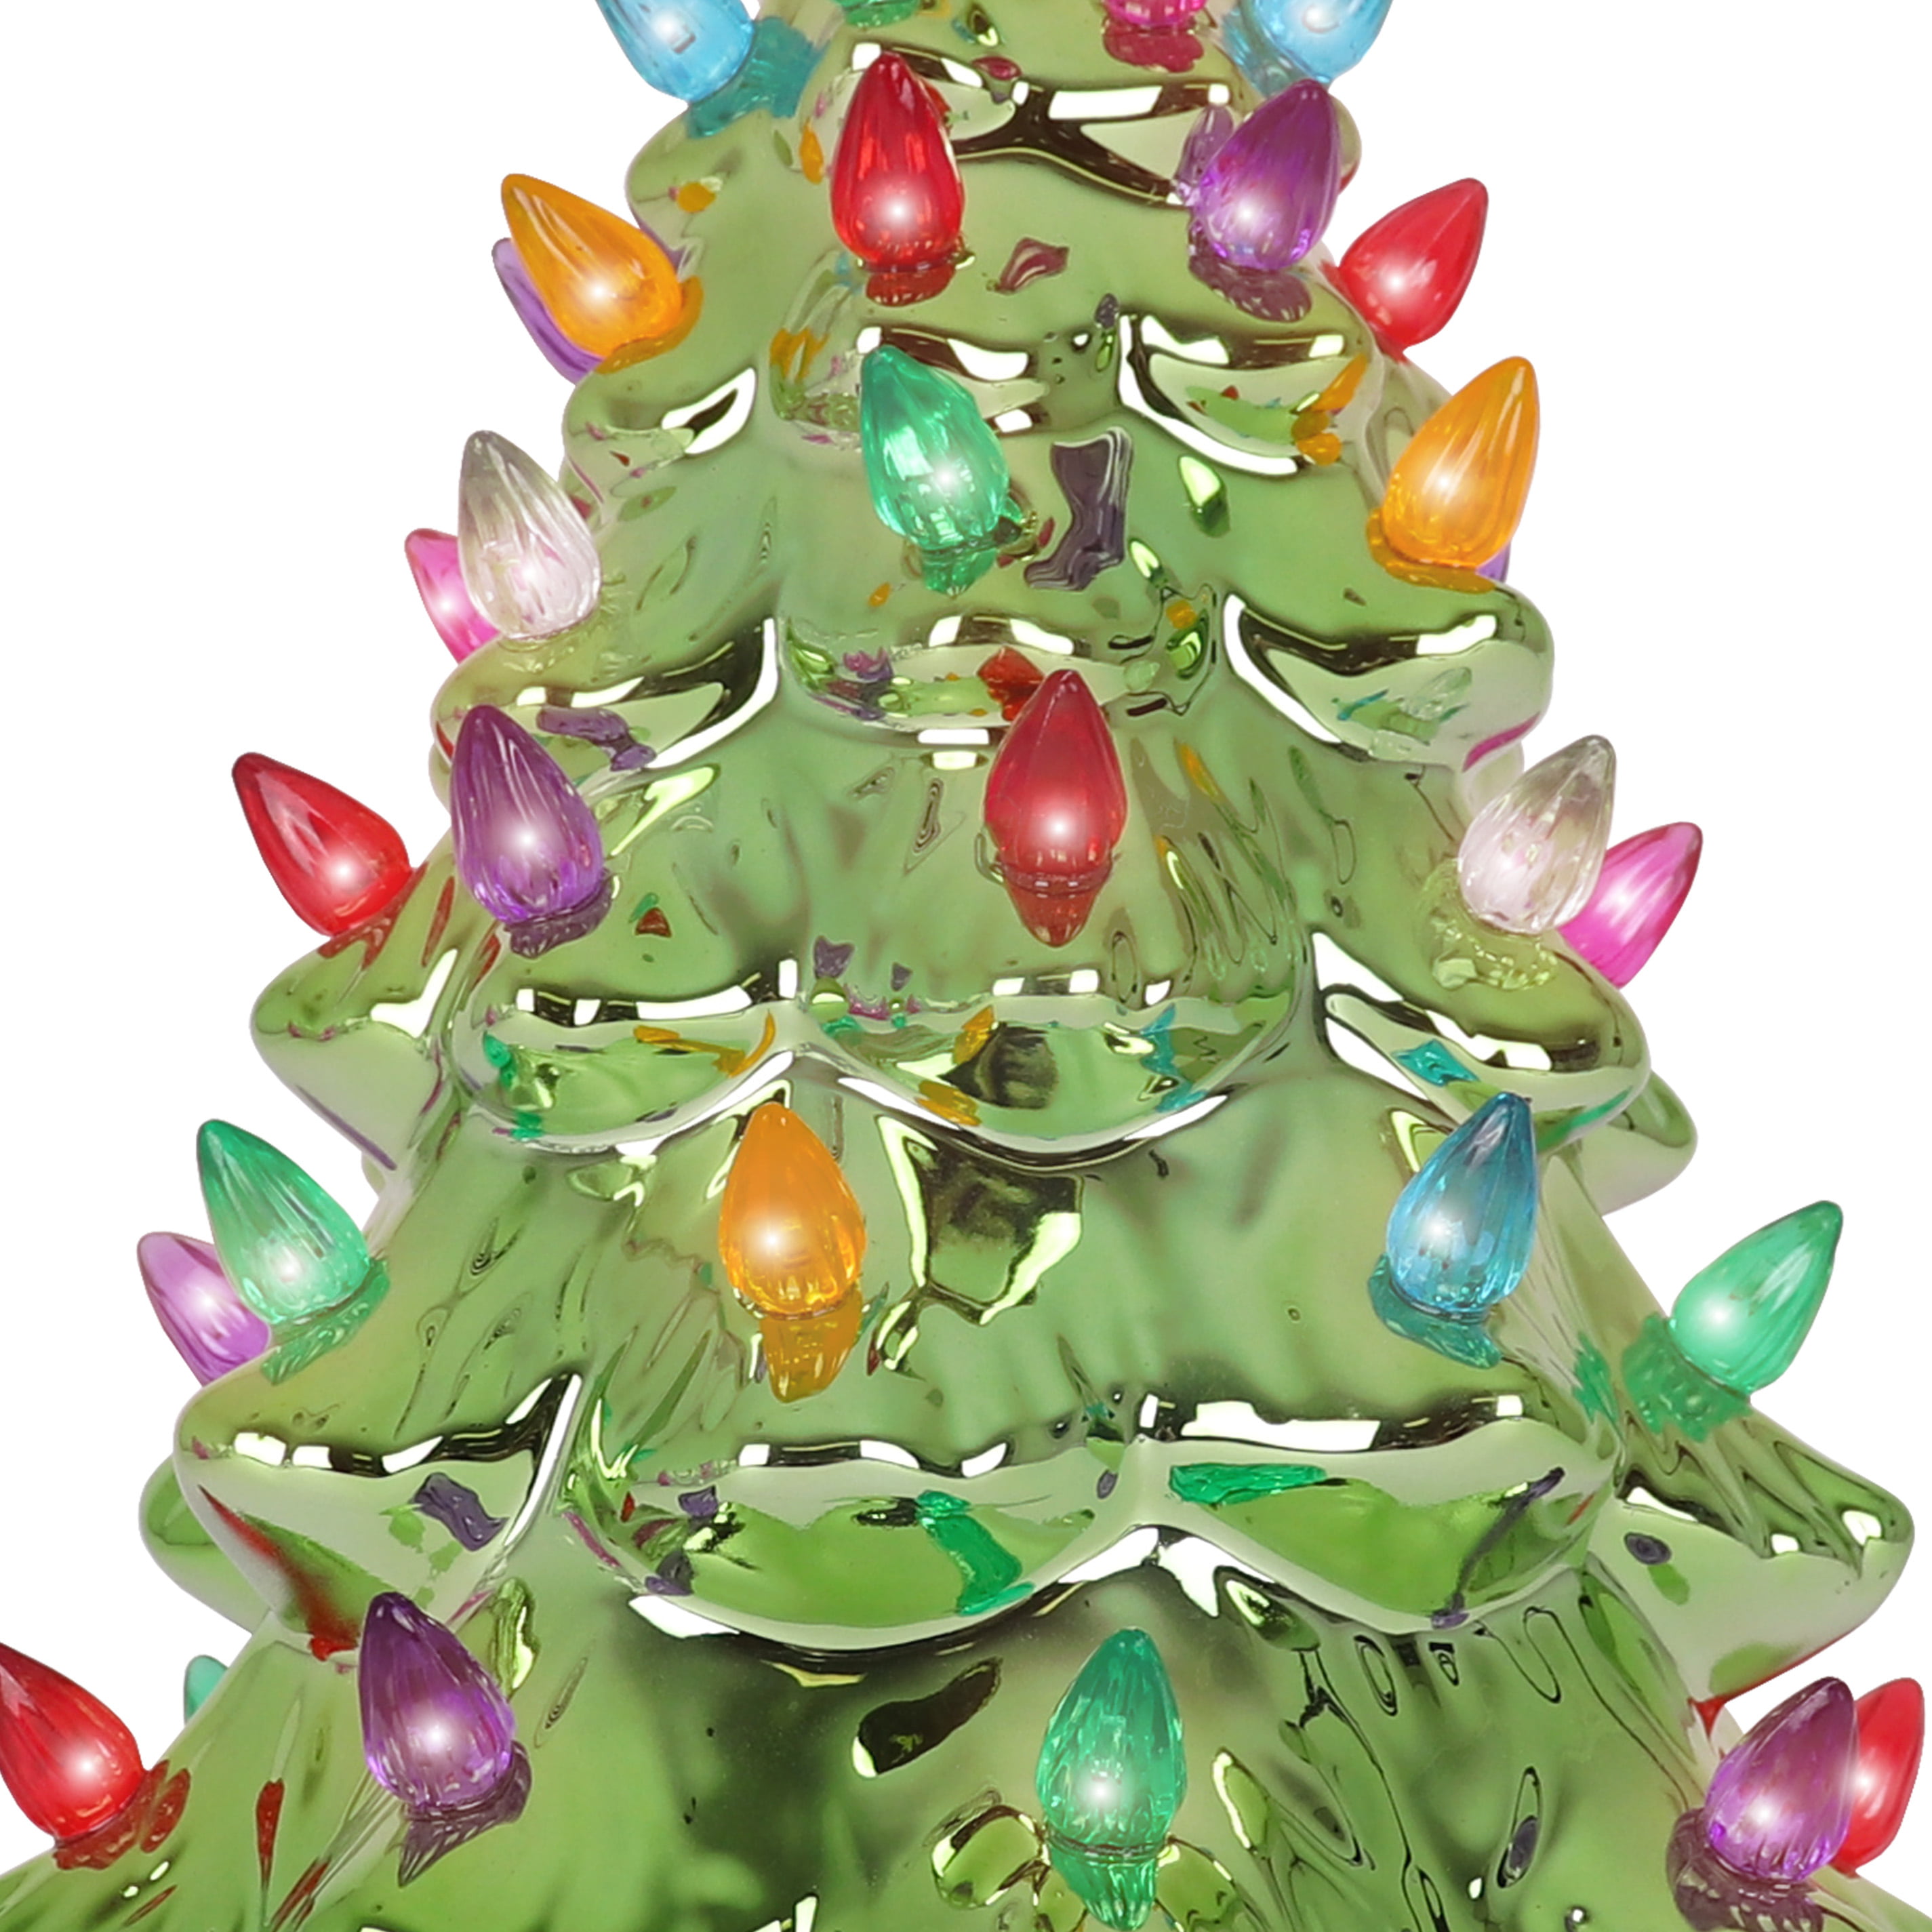  9 Ceramic Christmas Trees That Light Up - Vintage Ceramic  Tabletop Christmas Tree, Porcelain Magical Christmas Tree with 44  Multicolored Lights for Christmas Table Decorations : Home & Kitchen